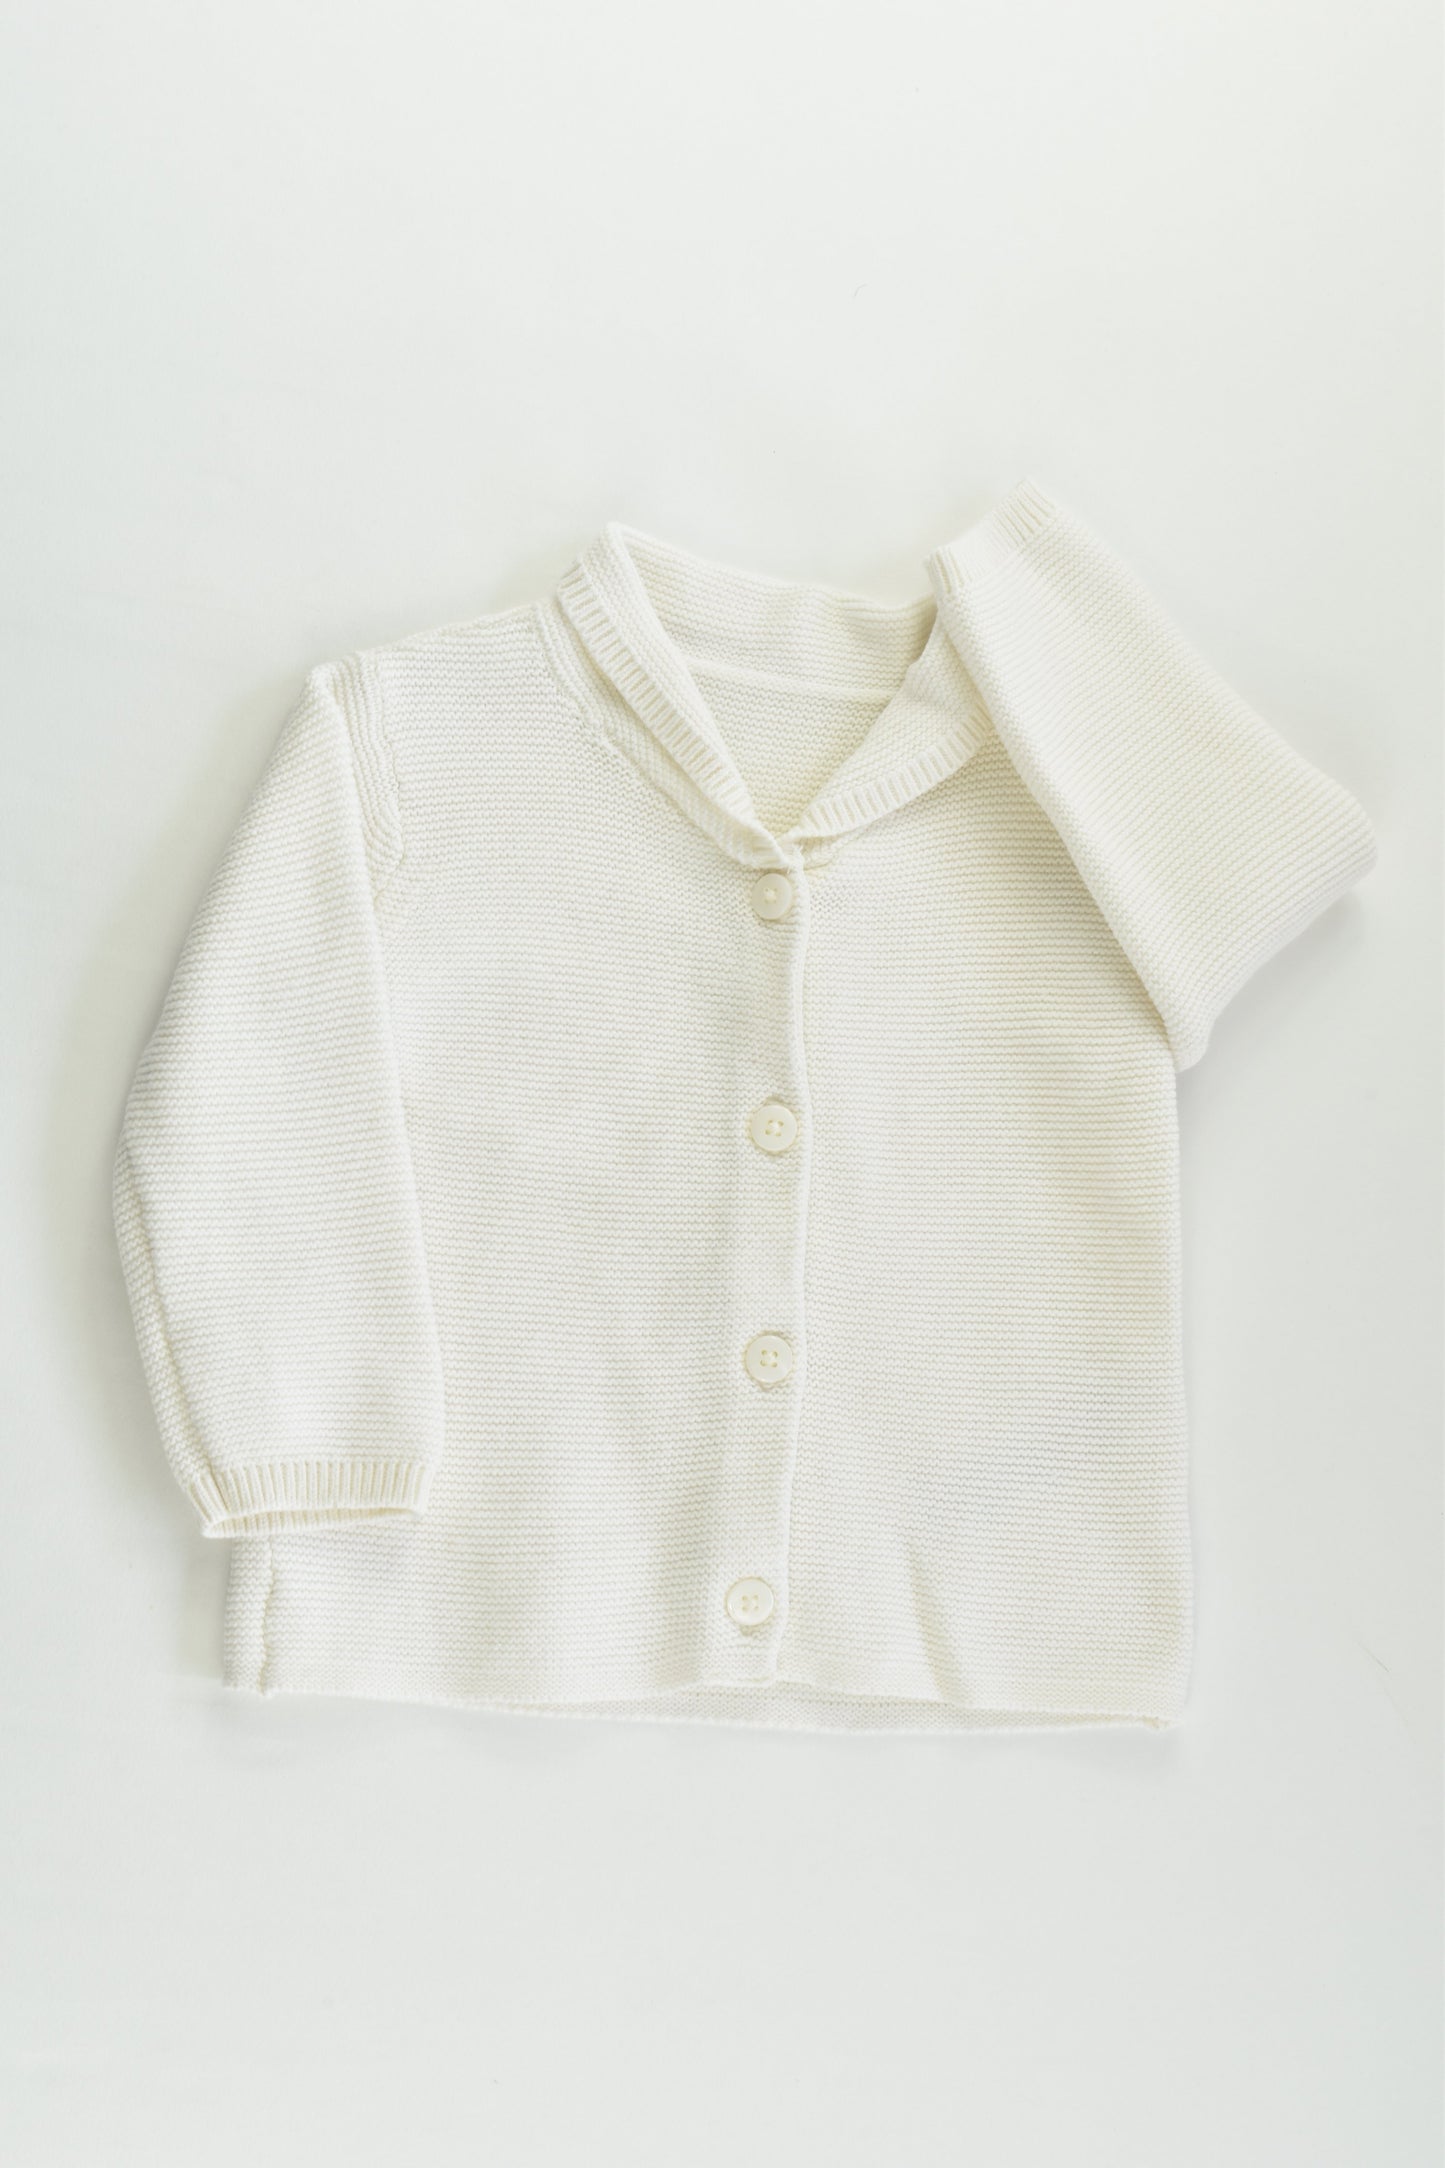 Marks & Spencer Size 00 (3-6 months) Knitted Cardigan